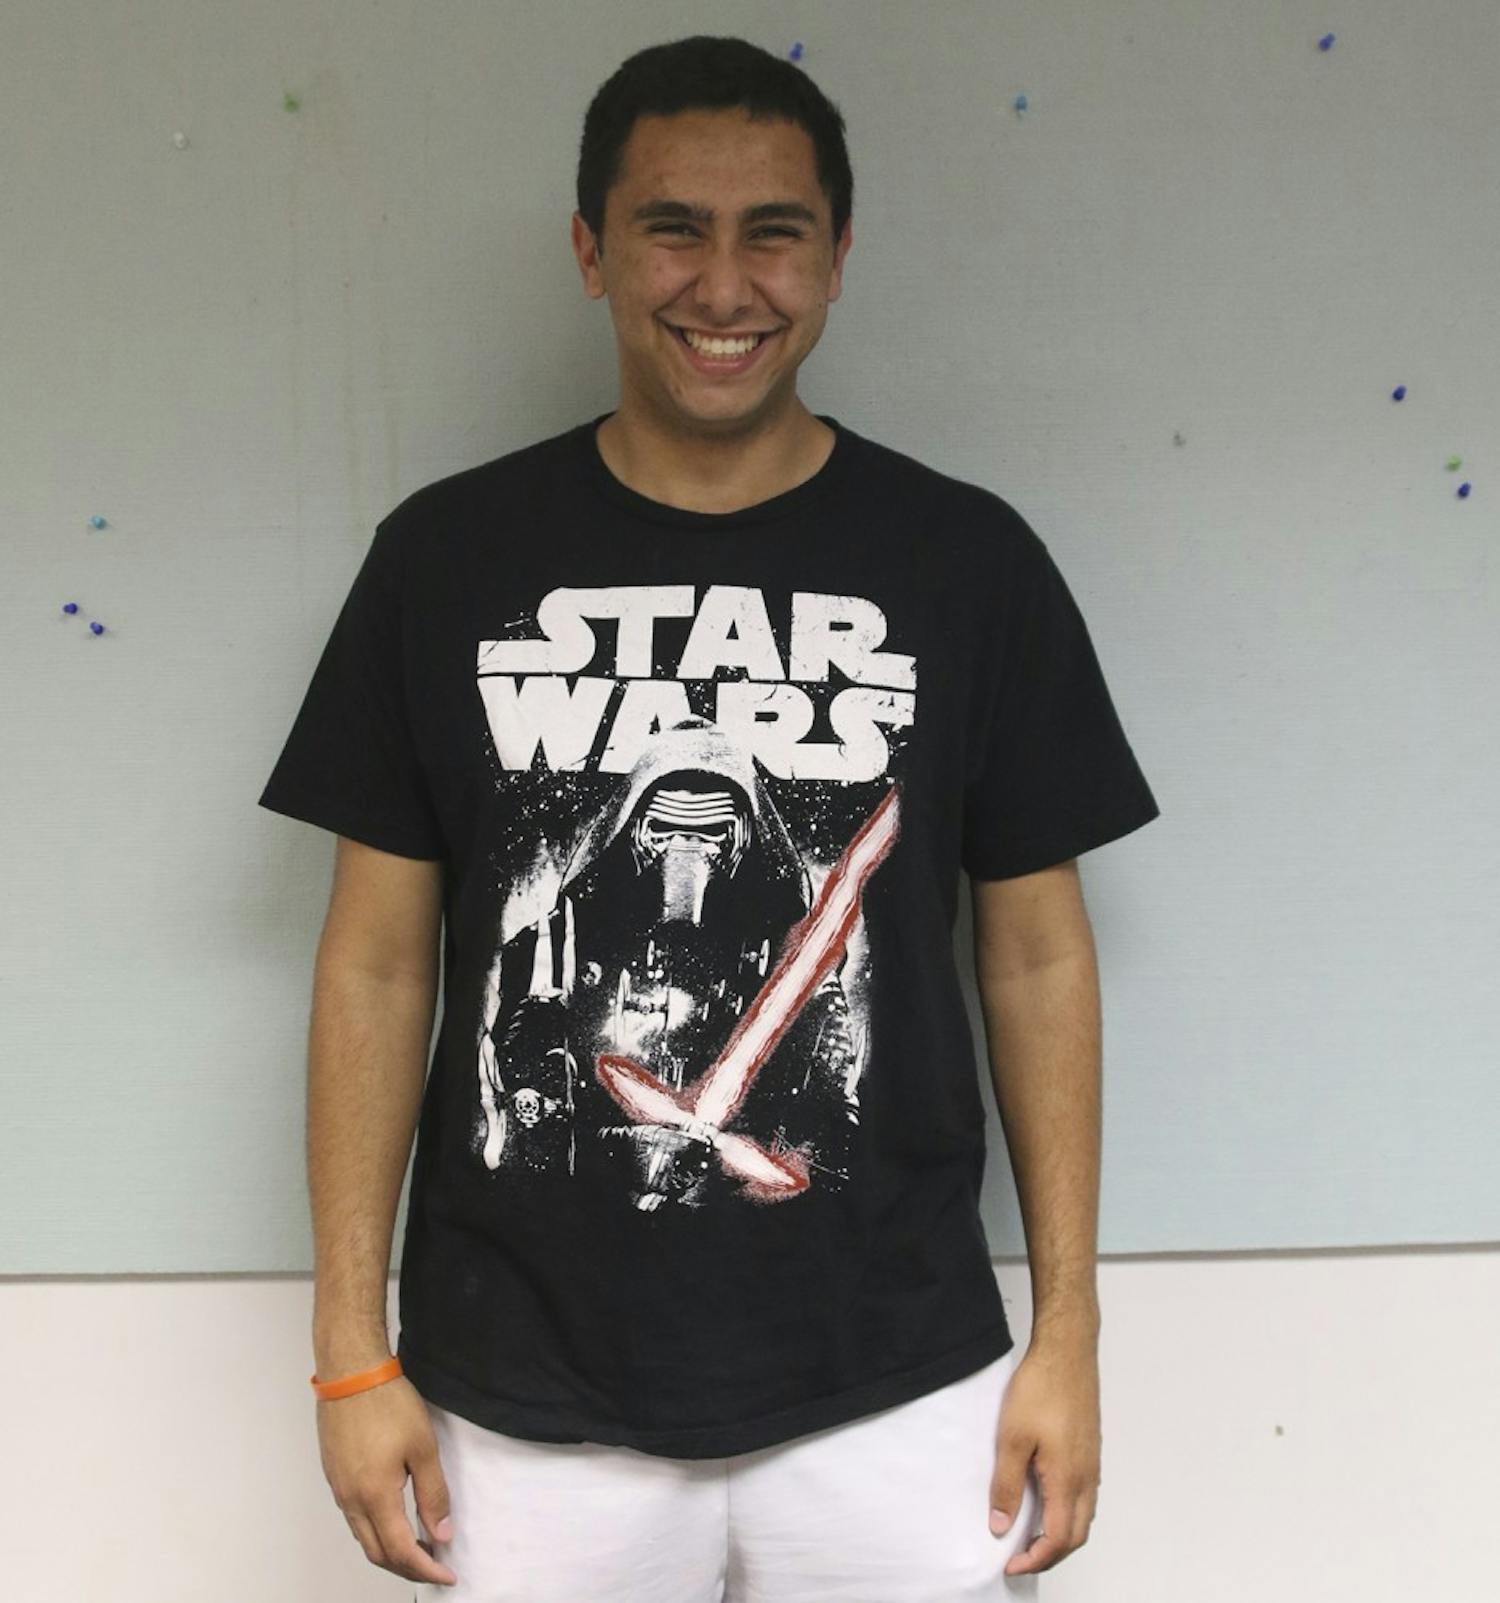 Co-Photo Editor Alex Kormann is a super fan of the Star Wars franchise and universe.